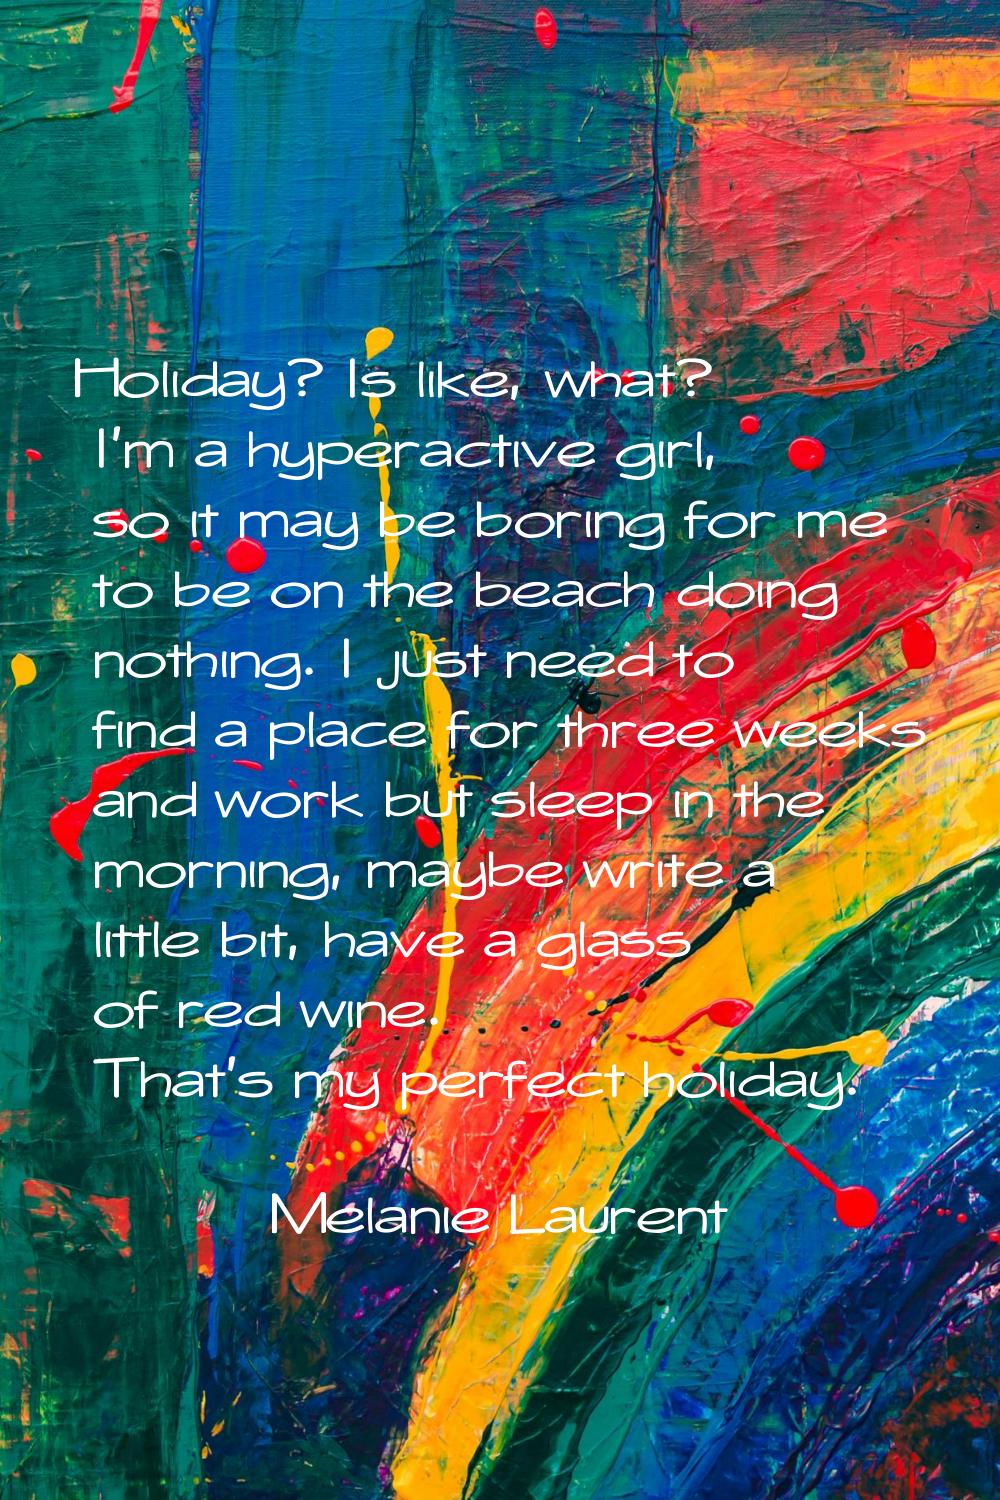 Holiday? Is like, what? I'm a hyperactive girl, so it may be boring for me to be on the beach doing